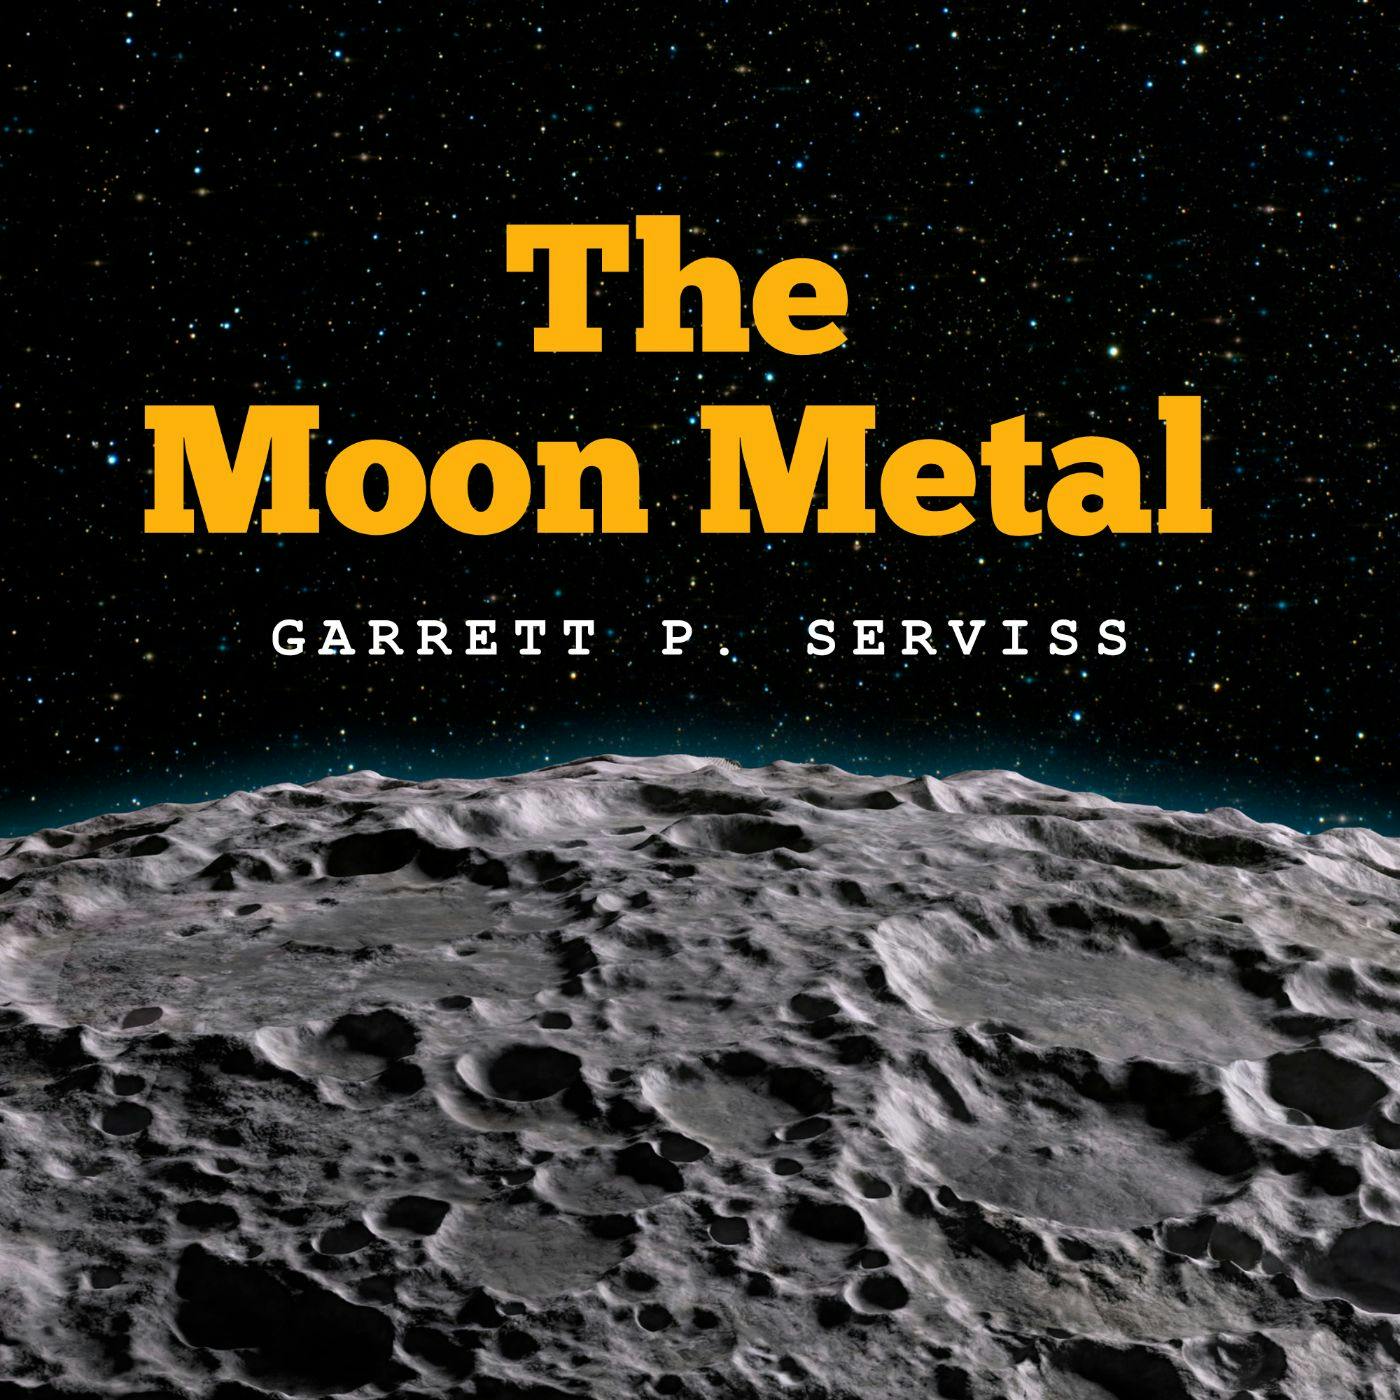 featured image - The Moon Metal by Garrett Putman Serviss - Table of Links